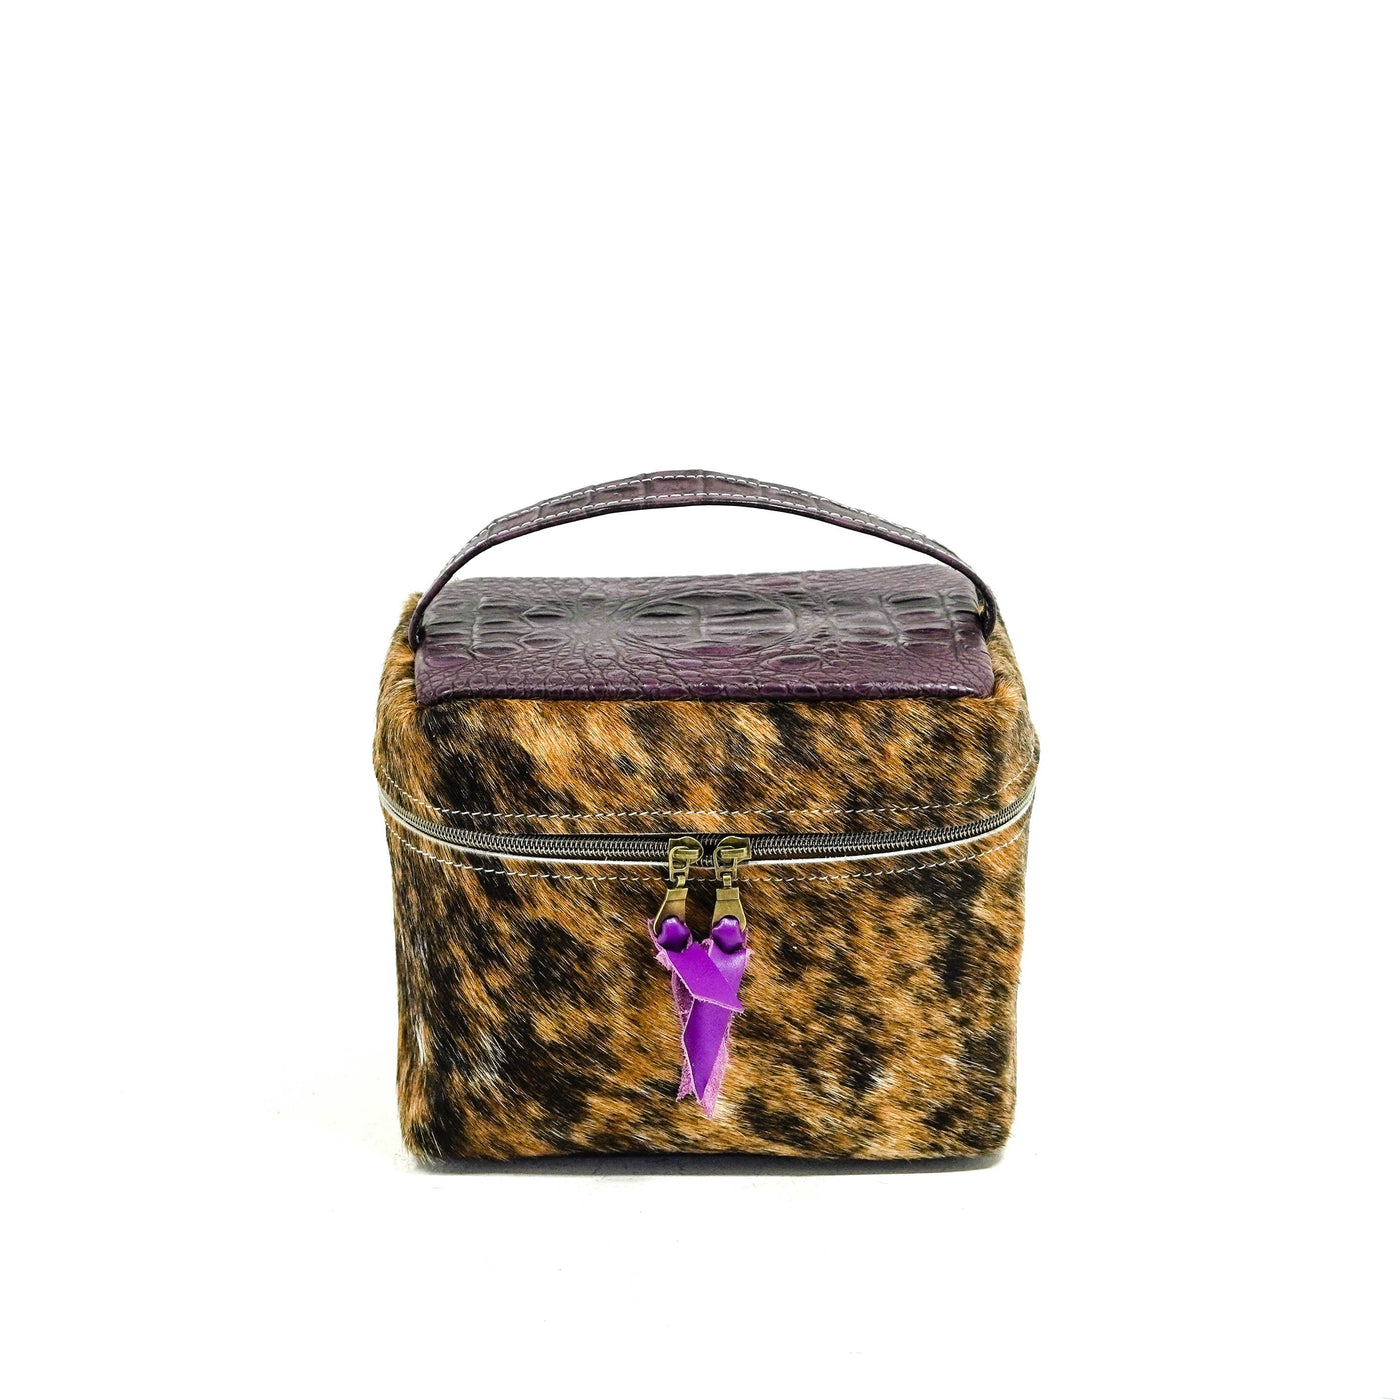 Caboose - Exotic Brindle w/ Amethyst Croc-Caboose-Western-Cowhide-Bags-Handmade-Products-Gifts-Dancing Cactus Designs